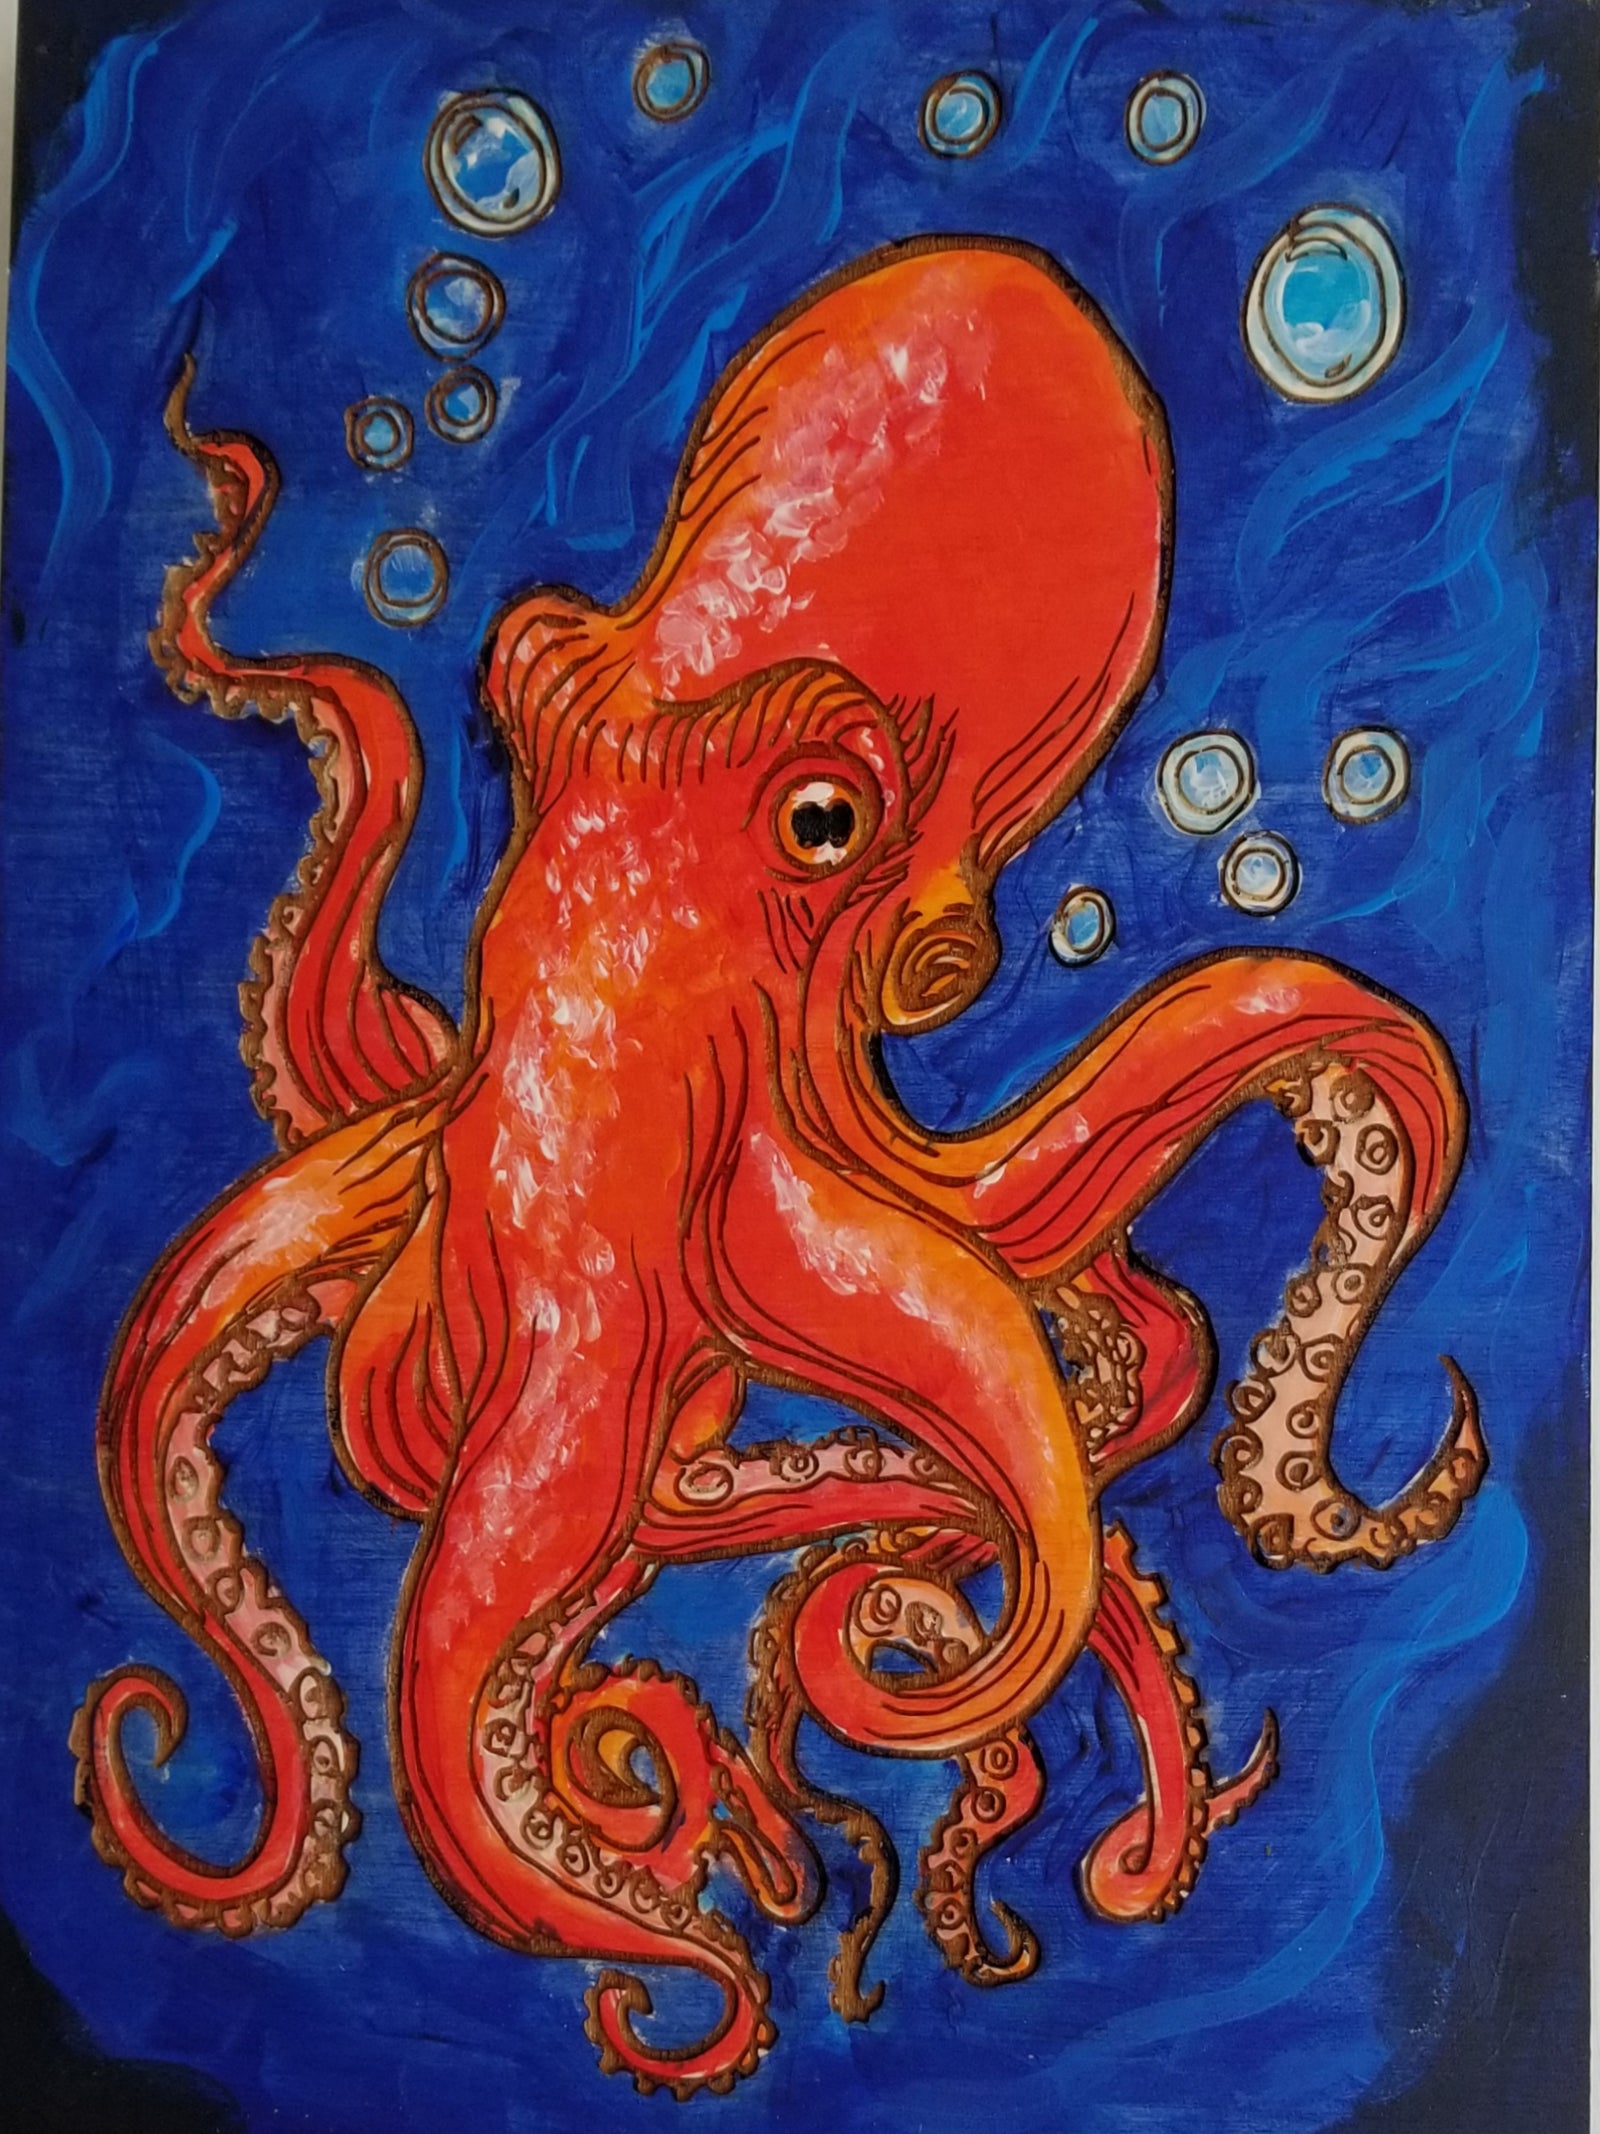 PAINTING CLASS: Octopus on Canvas